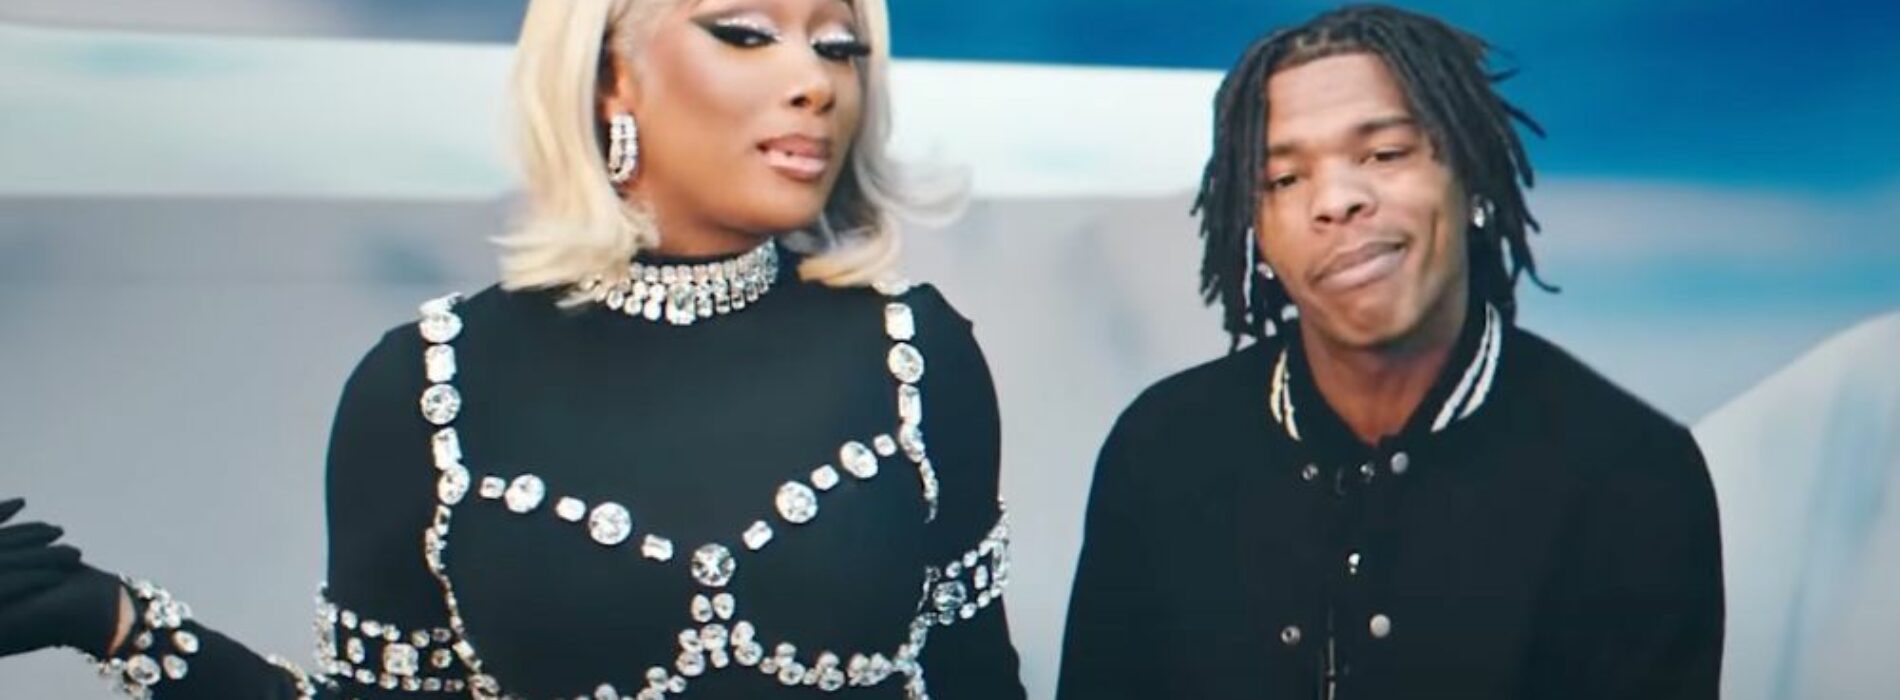 Lil Baby Feat. Megan Thee Stallion – On Me Remix (Official Video) – Mai 2021